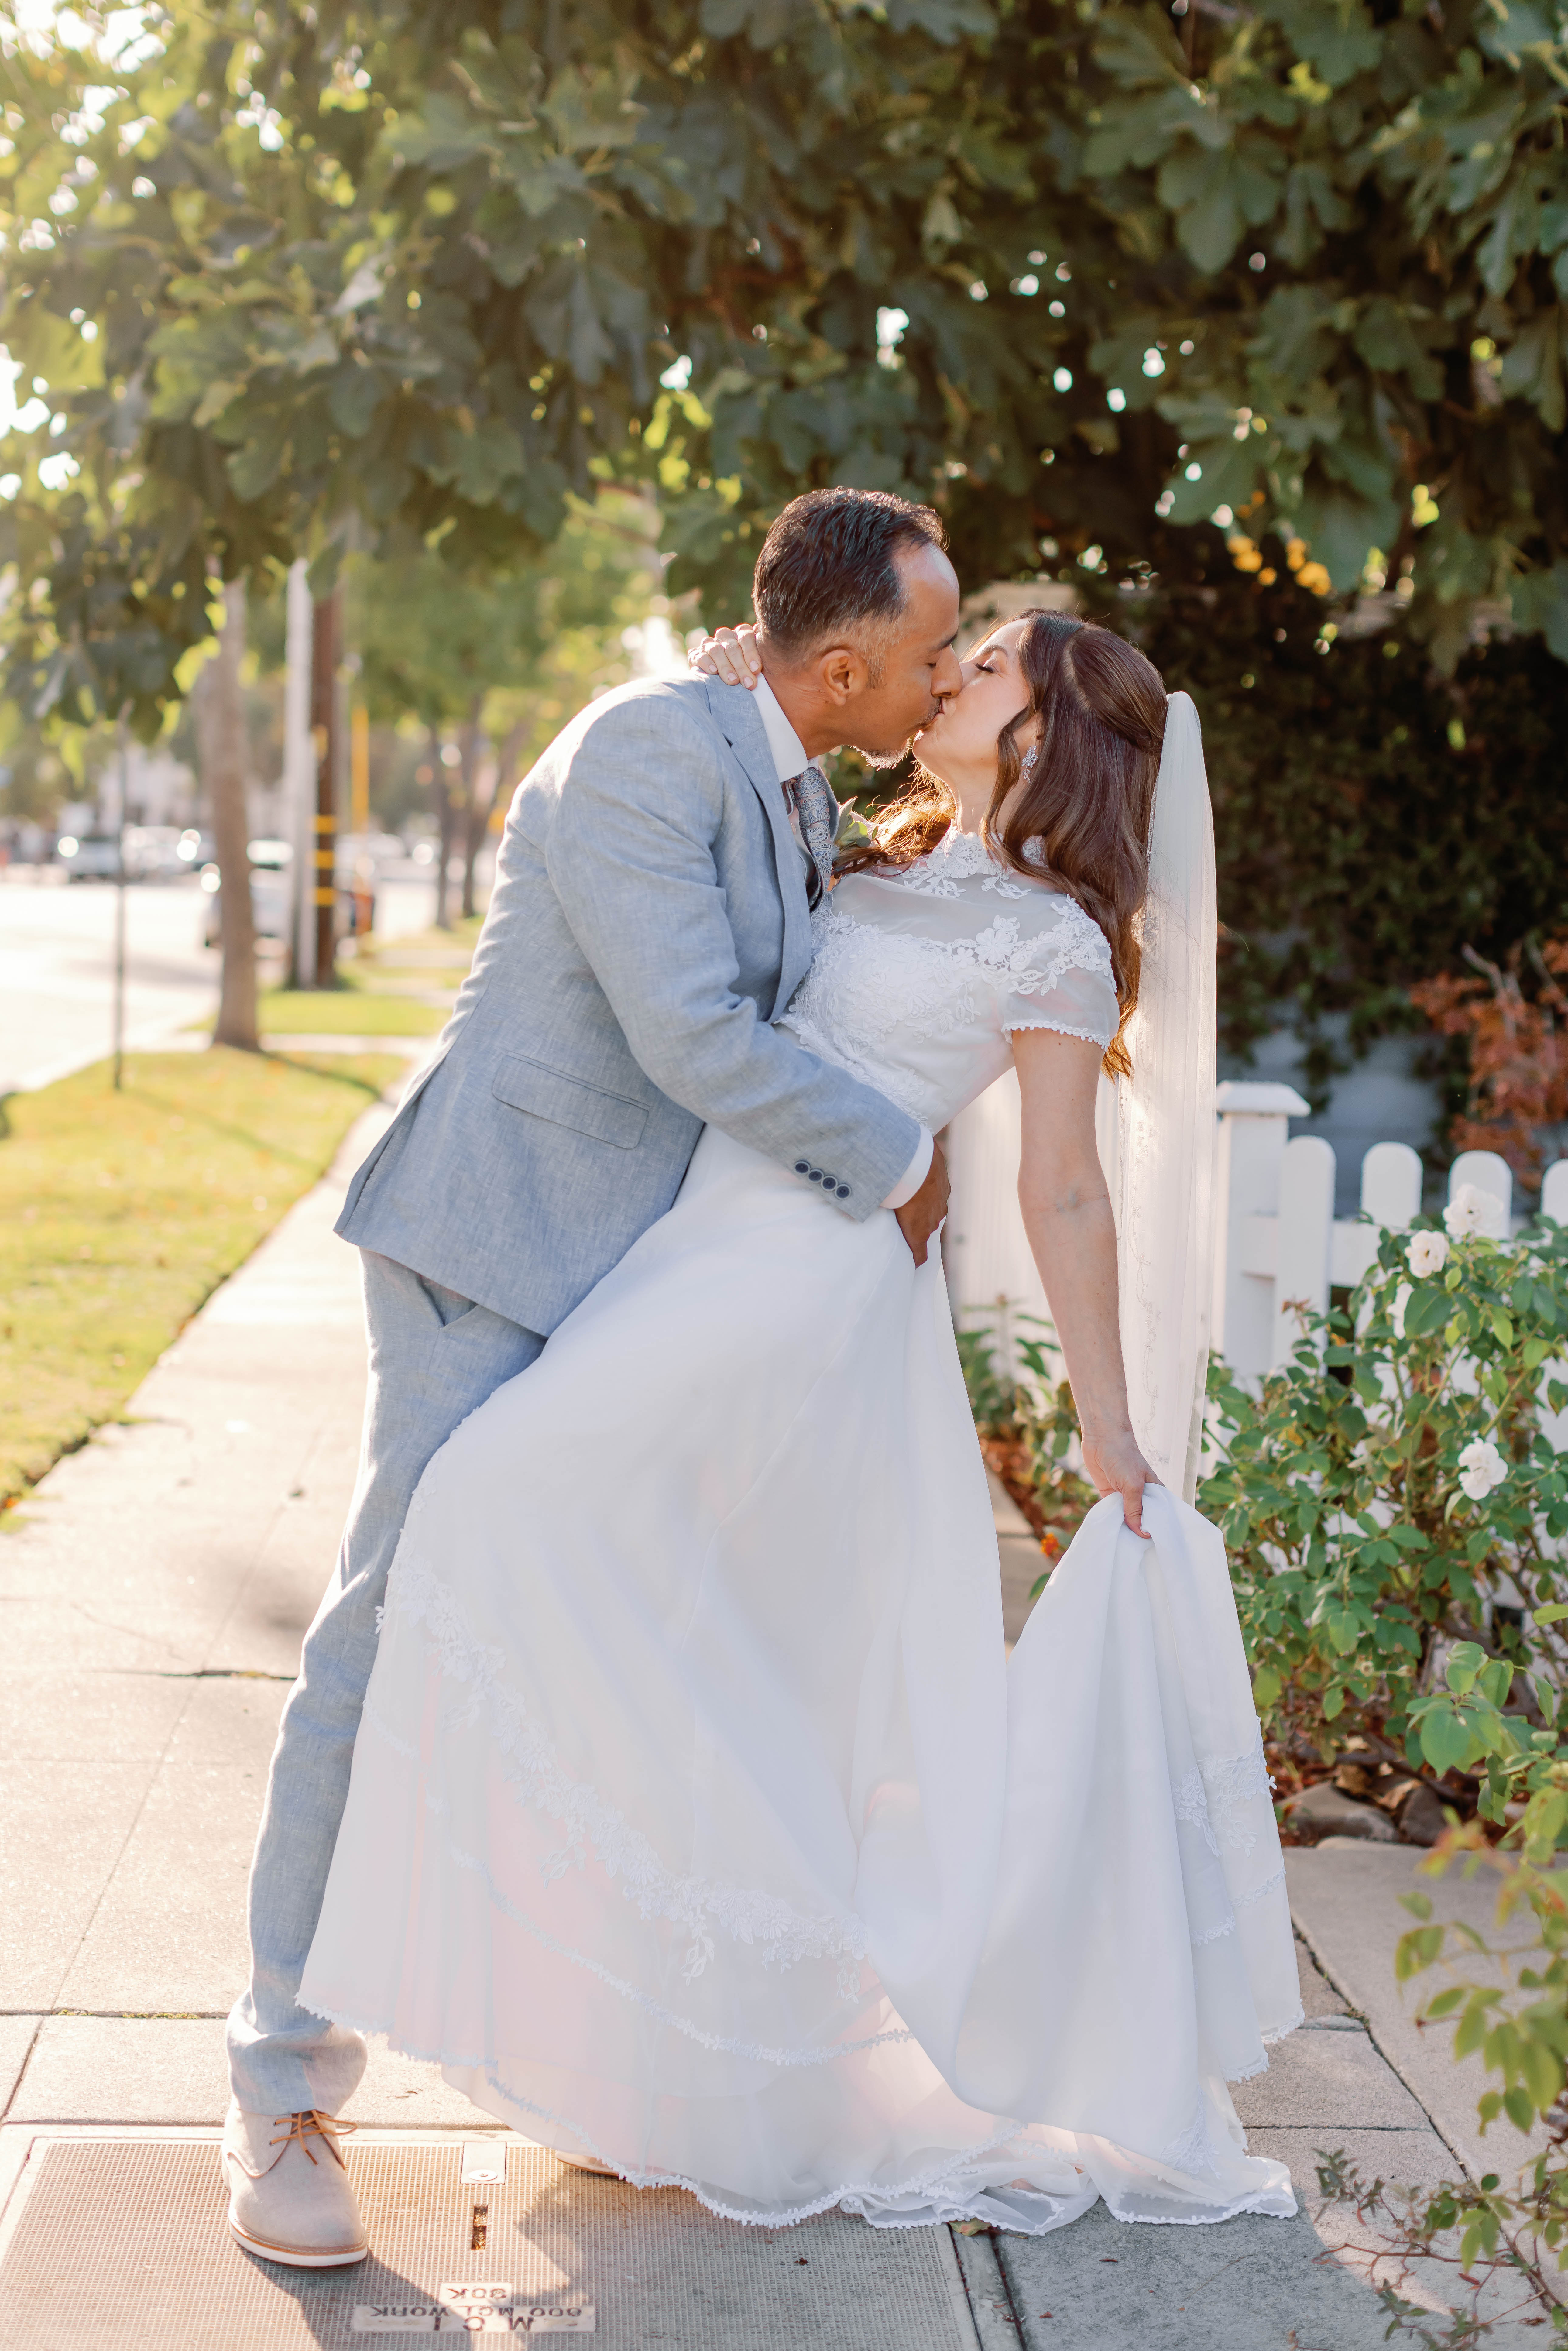 Bride and groom kiss in the sunlight | Photo by Sarah Block Photography